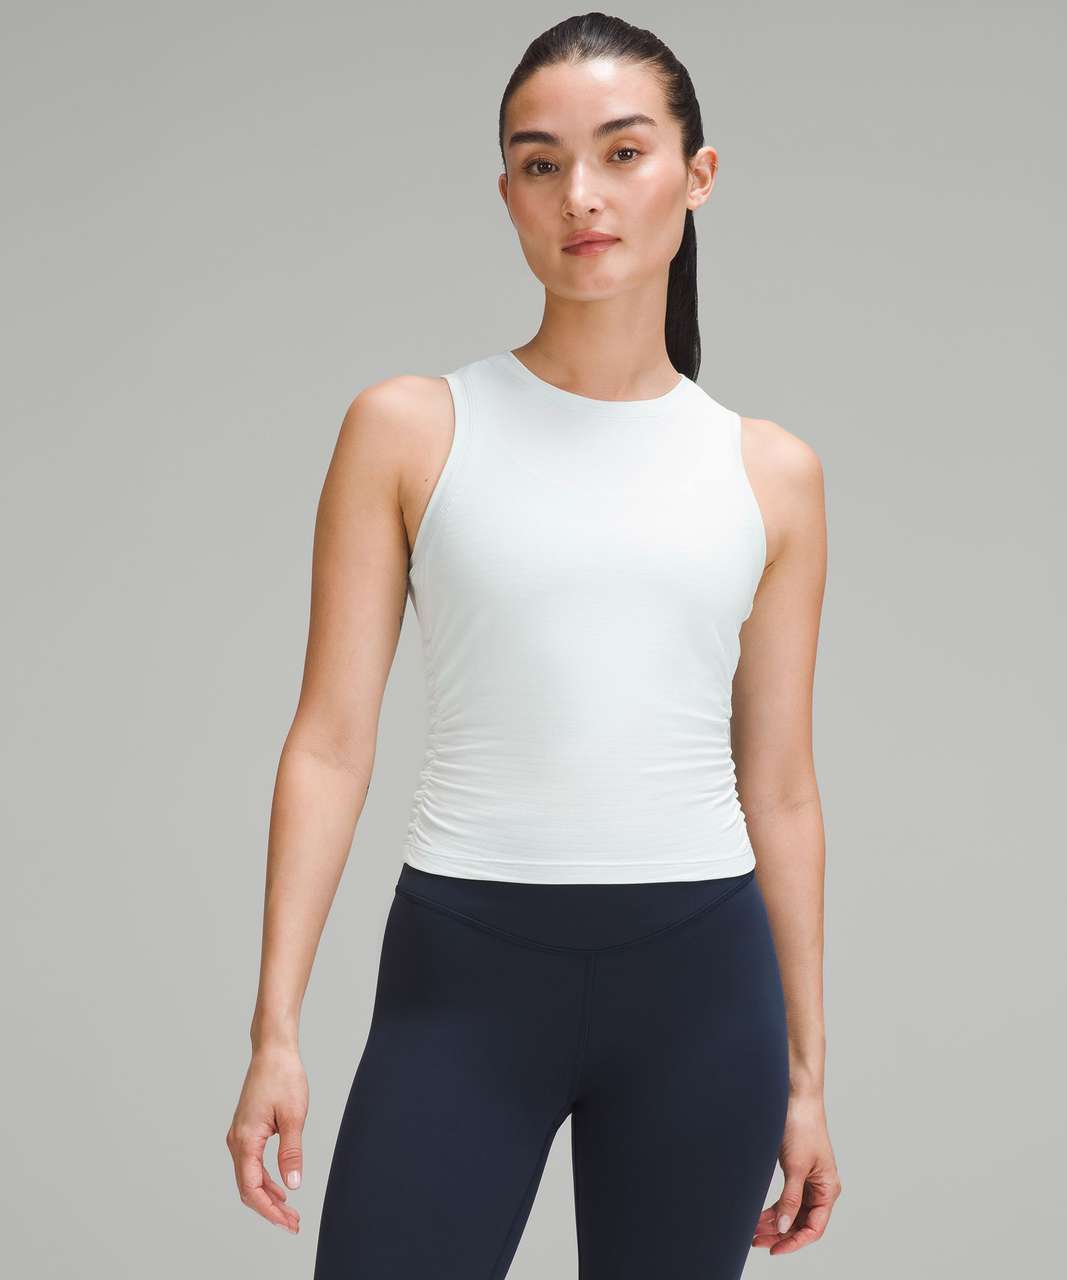 Lululemon License to Train Tight-Fit Tank Top - Heathered Sheer Blue